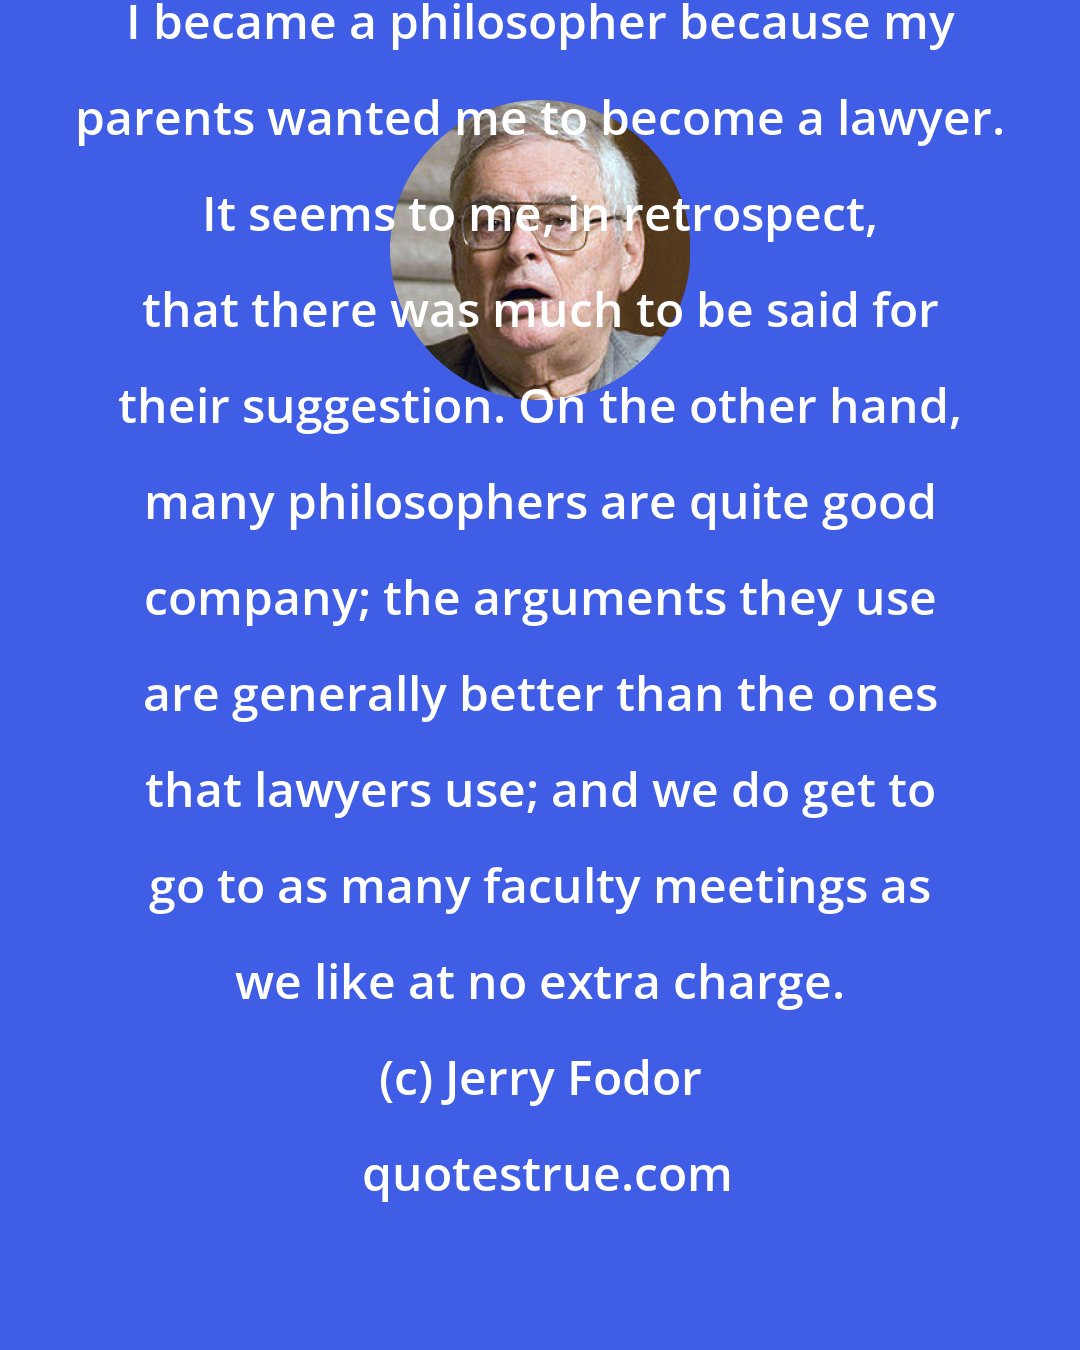 Jerry Fodor: To the best of my recollection, I became a philosopher because my parents wanted me to become a lawyer. It seems to me, in retrospect, that there was much to be said for their suggestion. On the other hand, many philosophers are quite good company; the arguments they use are generally better than the ones that lawyers use; and we do get to go to as many faculty meetings as we like at no extra charge.